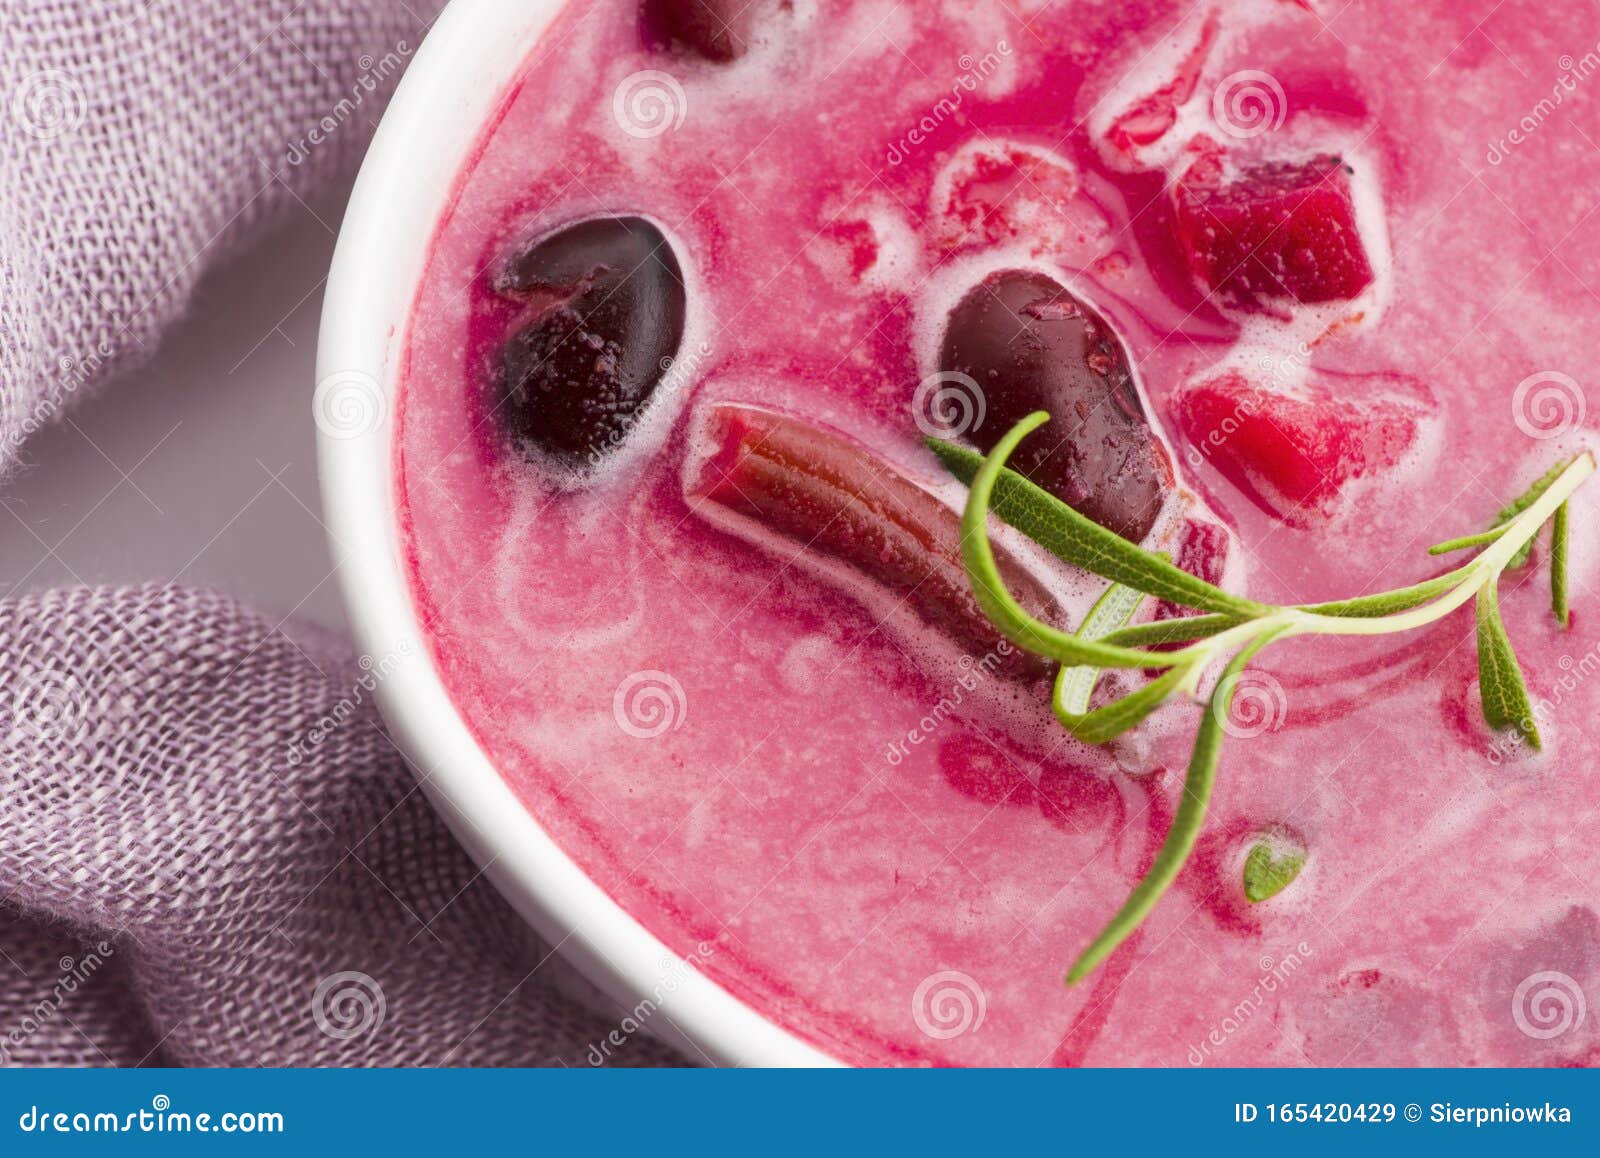 Beet Root European Soup Called Borscht with Parsley Stock Image - Image ...